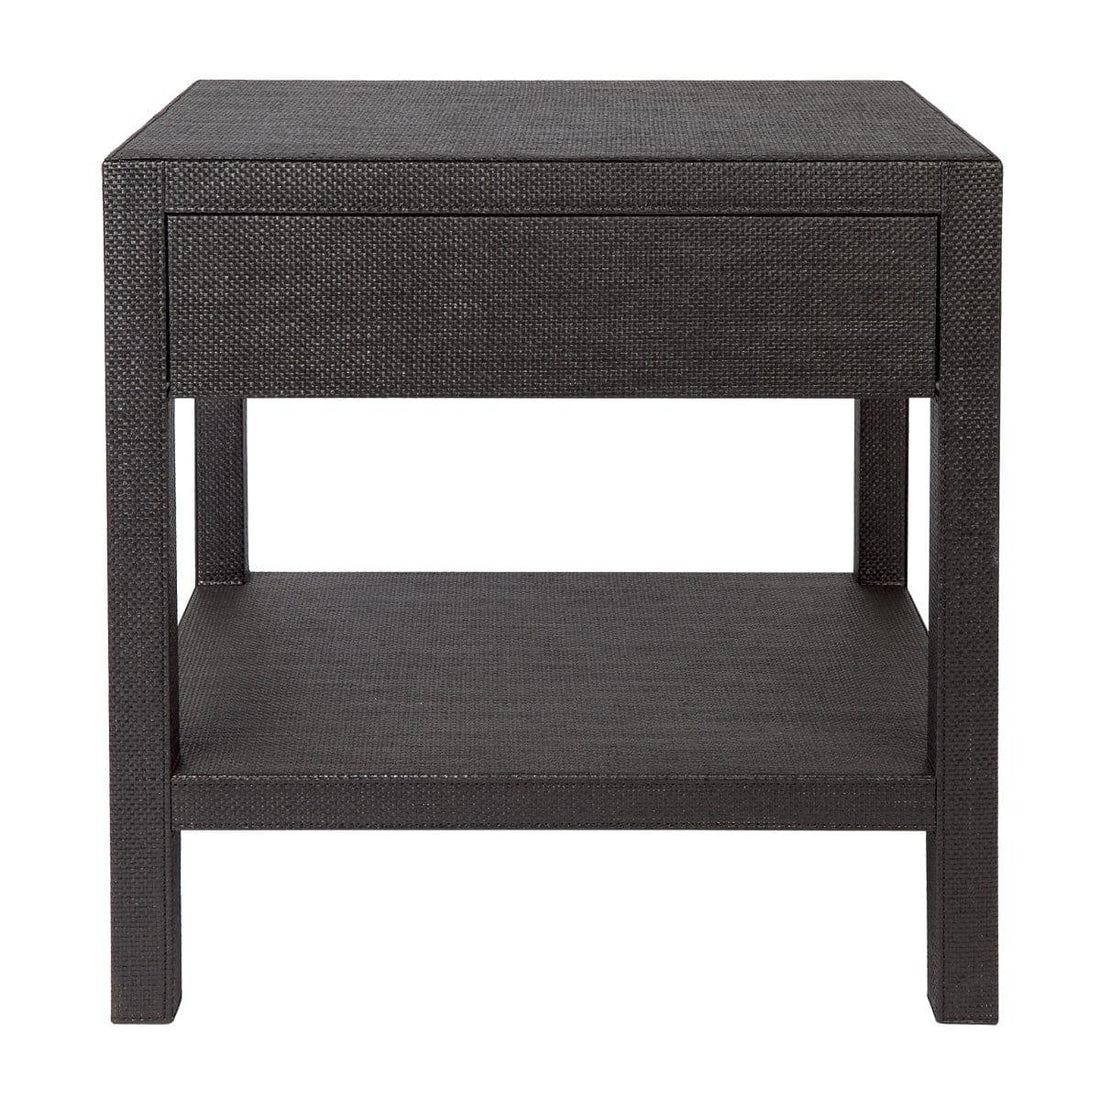 House Journey Chiswick Bedside Table - Black